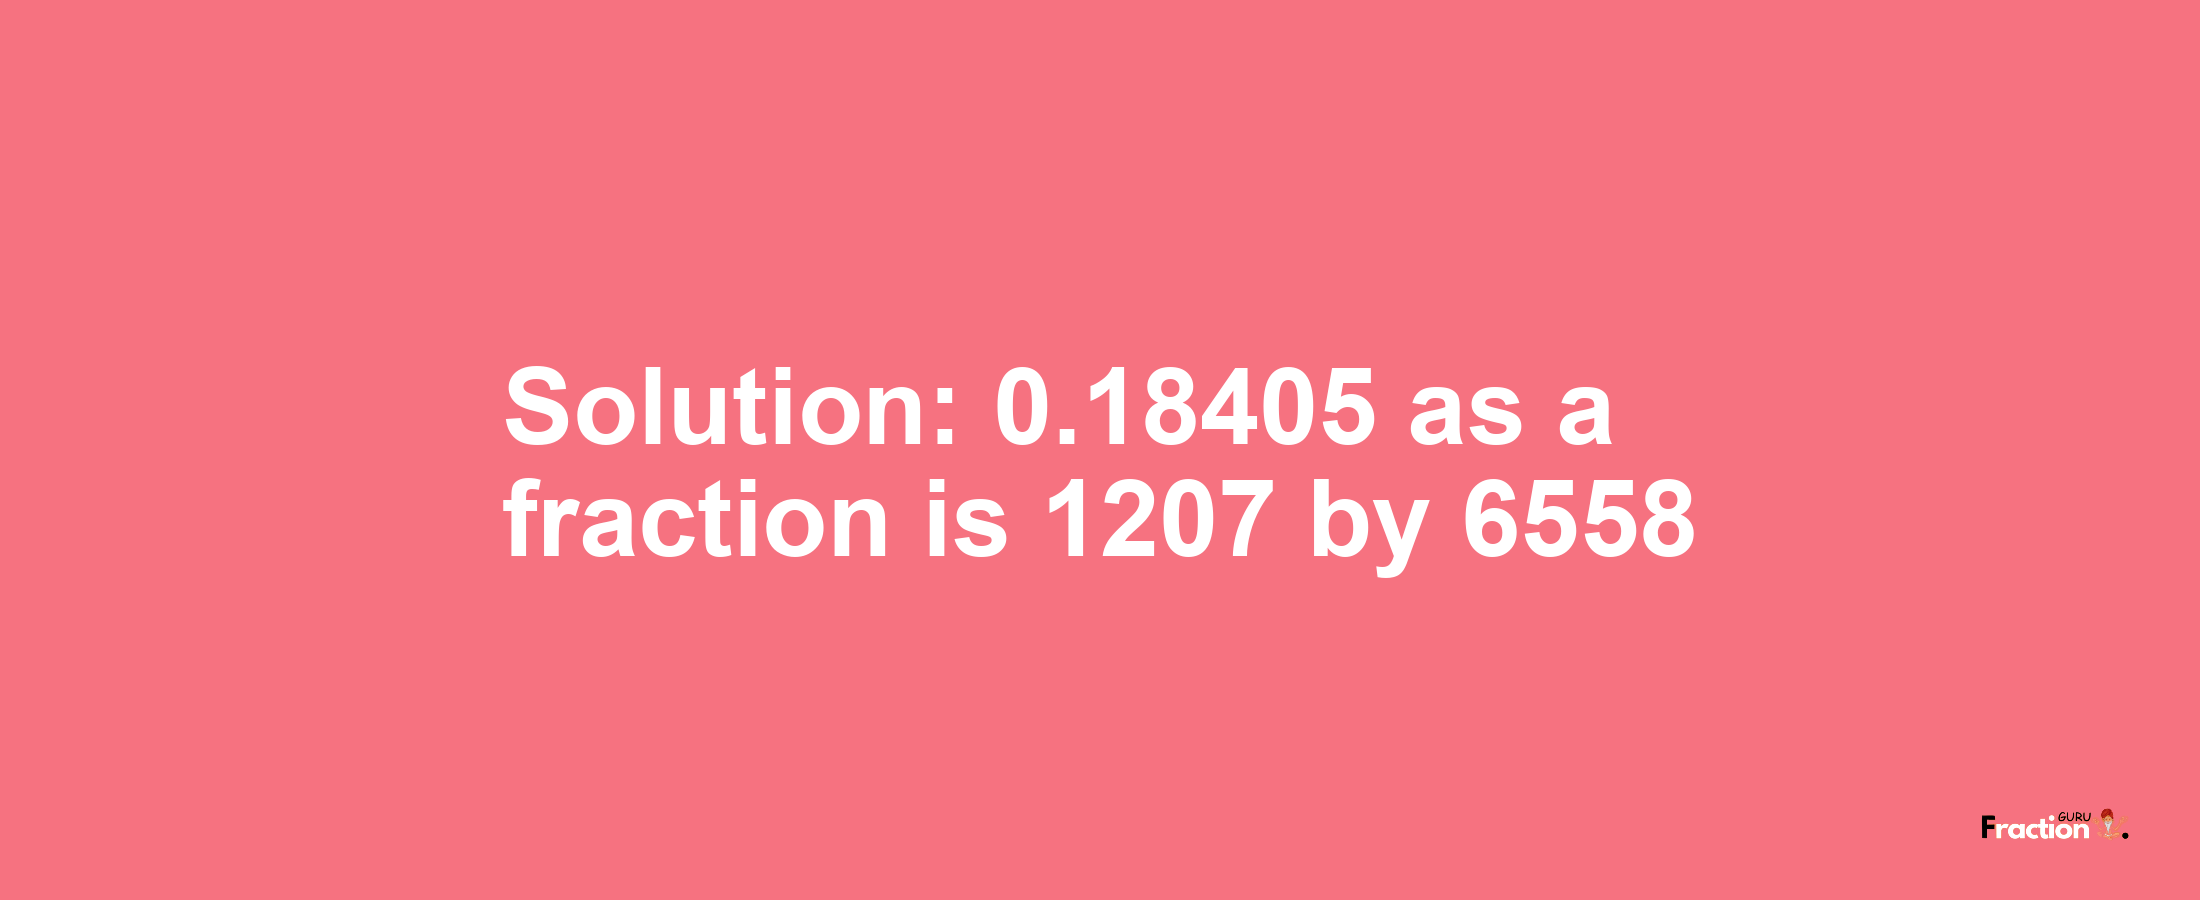 Solution:0.18405 as a fraction is 1207/6558